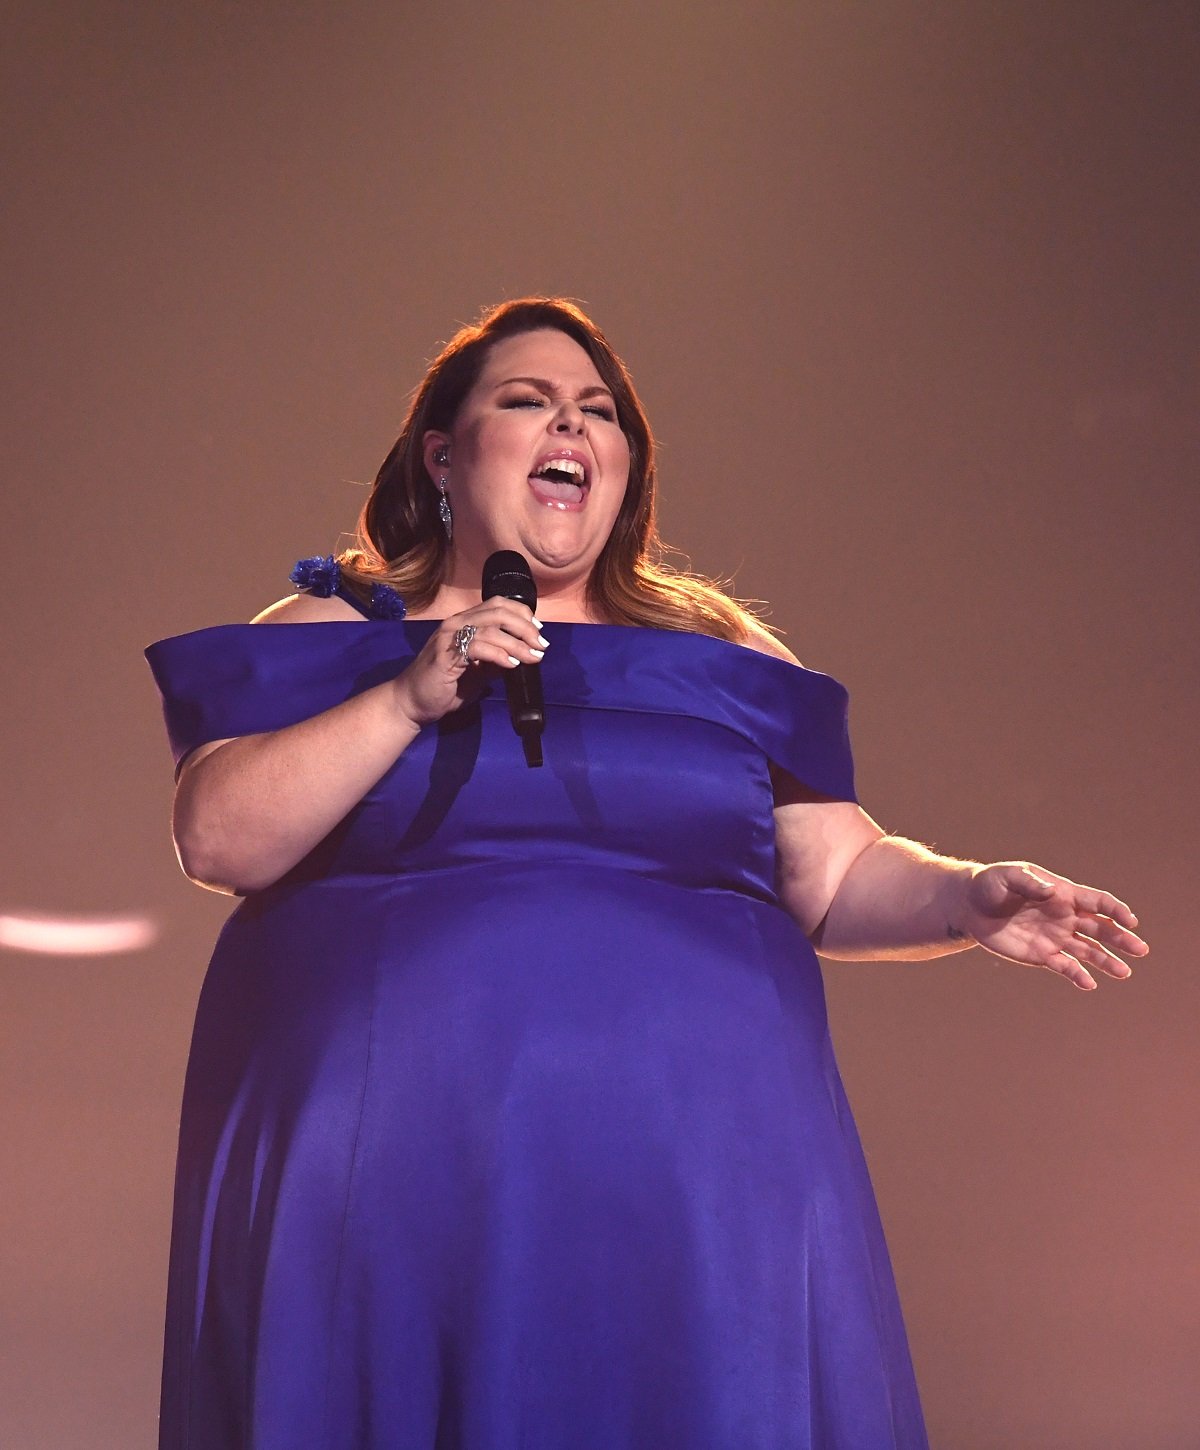 Chrissy Metz on April 07, 2019, in Las Vegas, Nevada. | Source: Getty Images